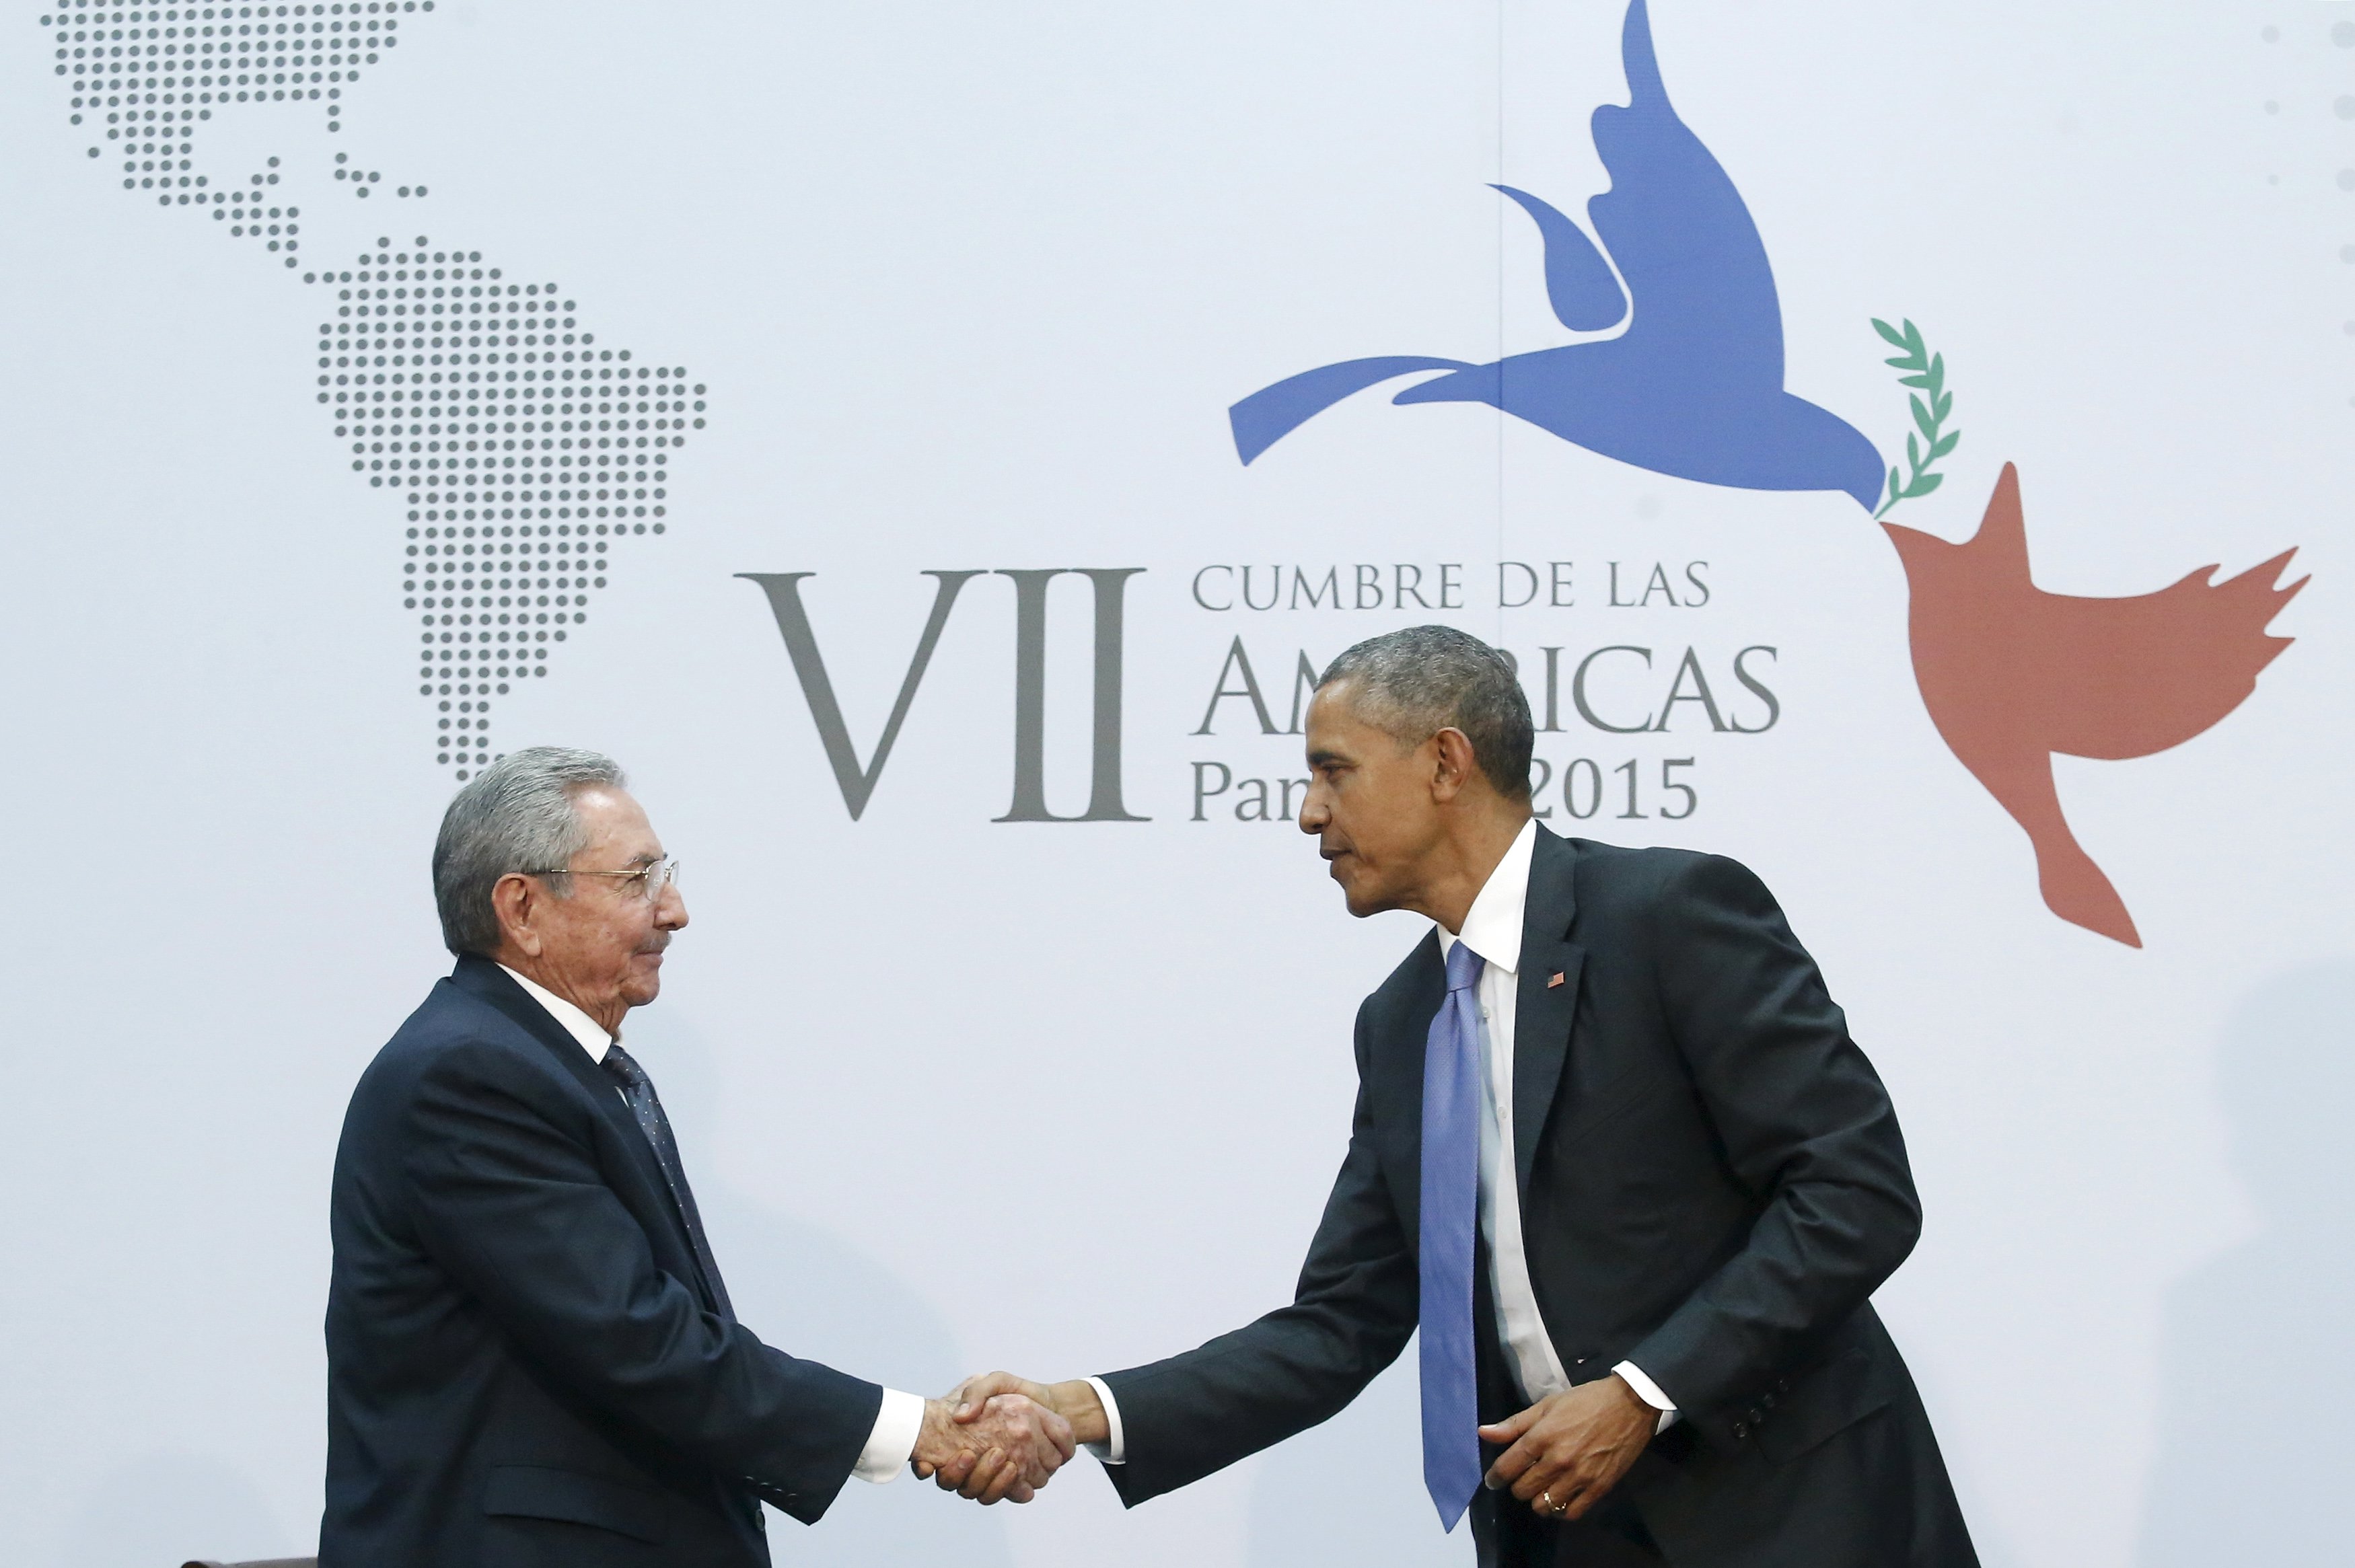 History now made, U.S. and Cuba face bumpy road ahead